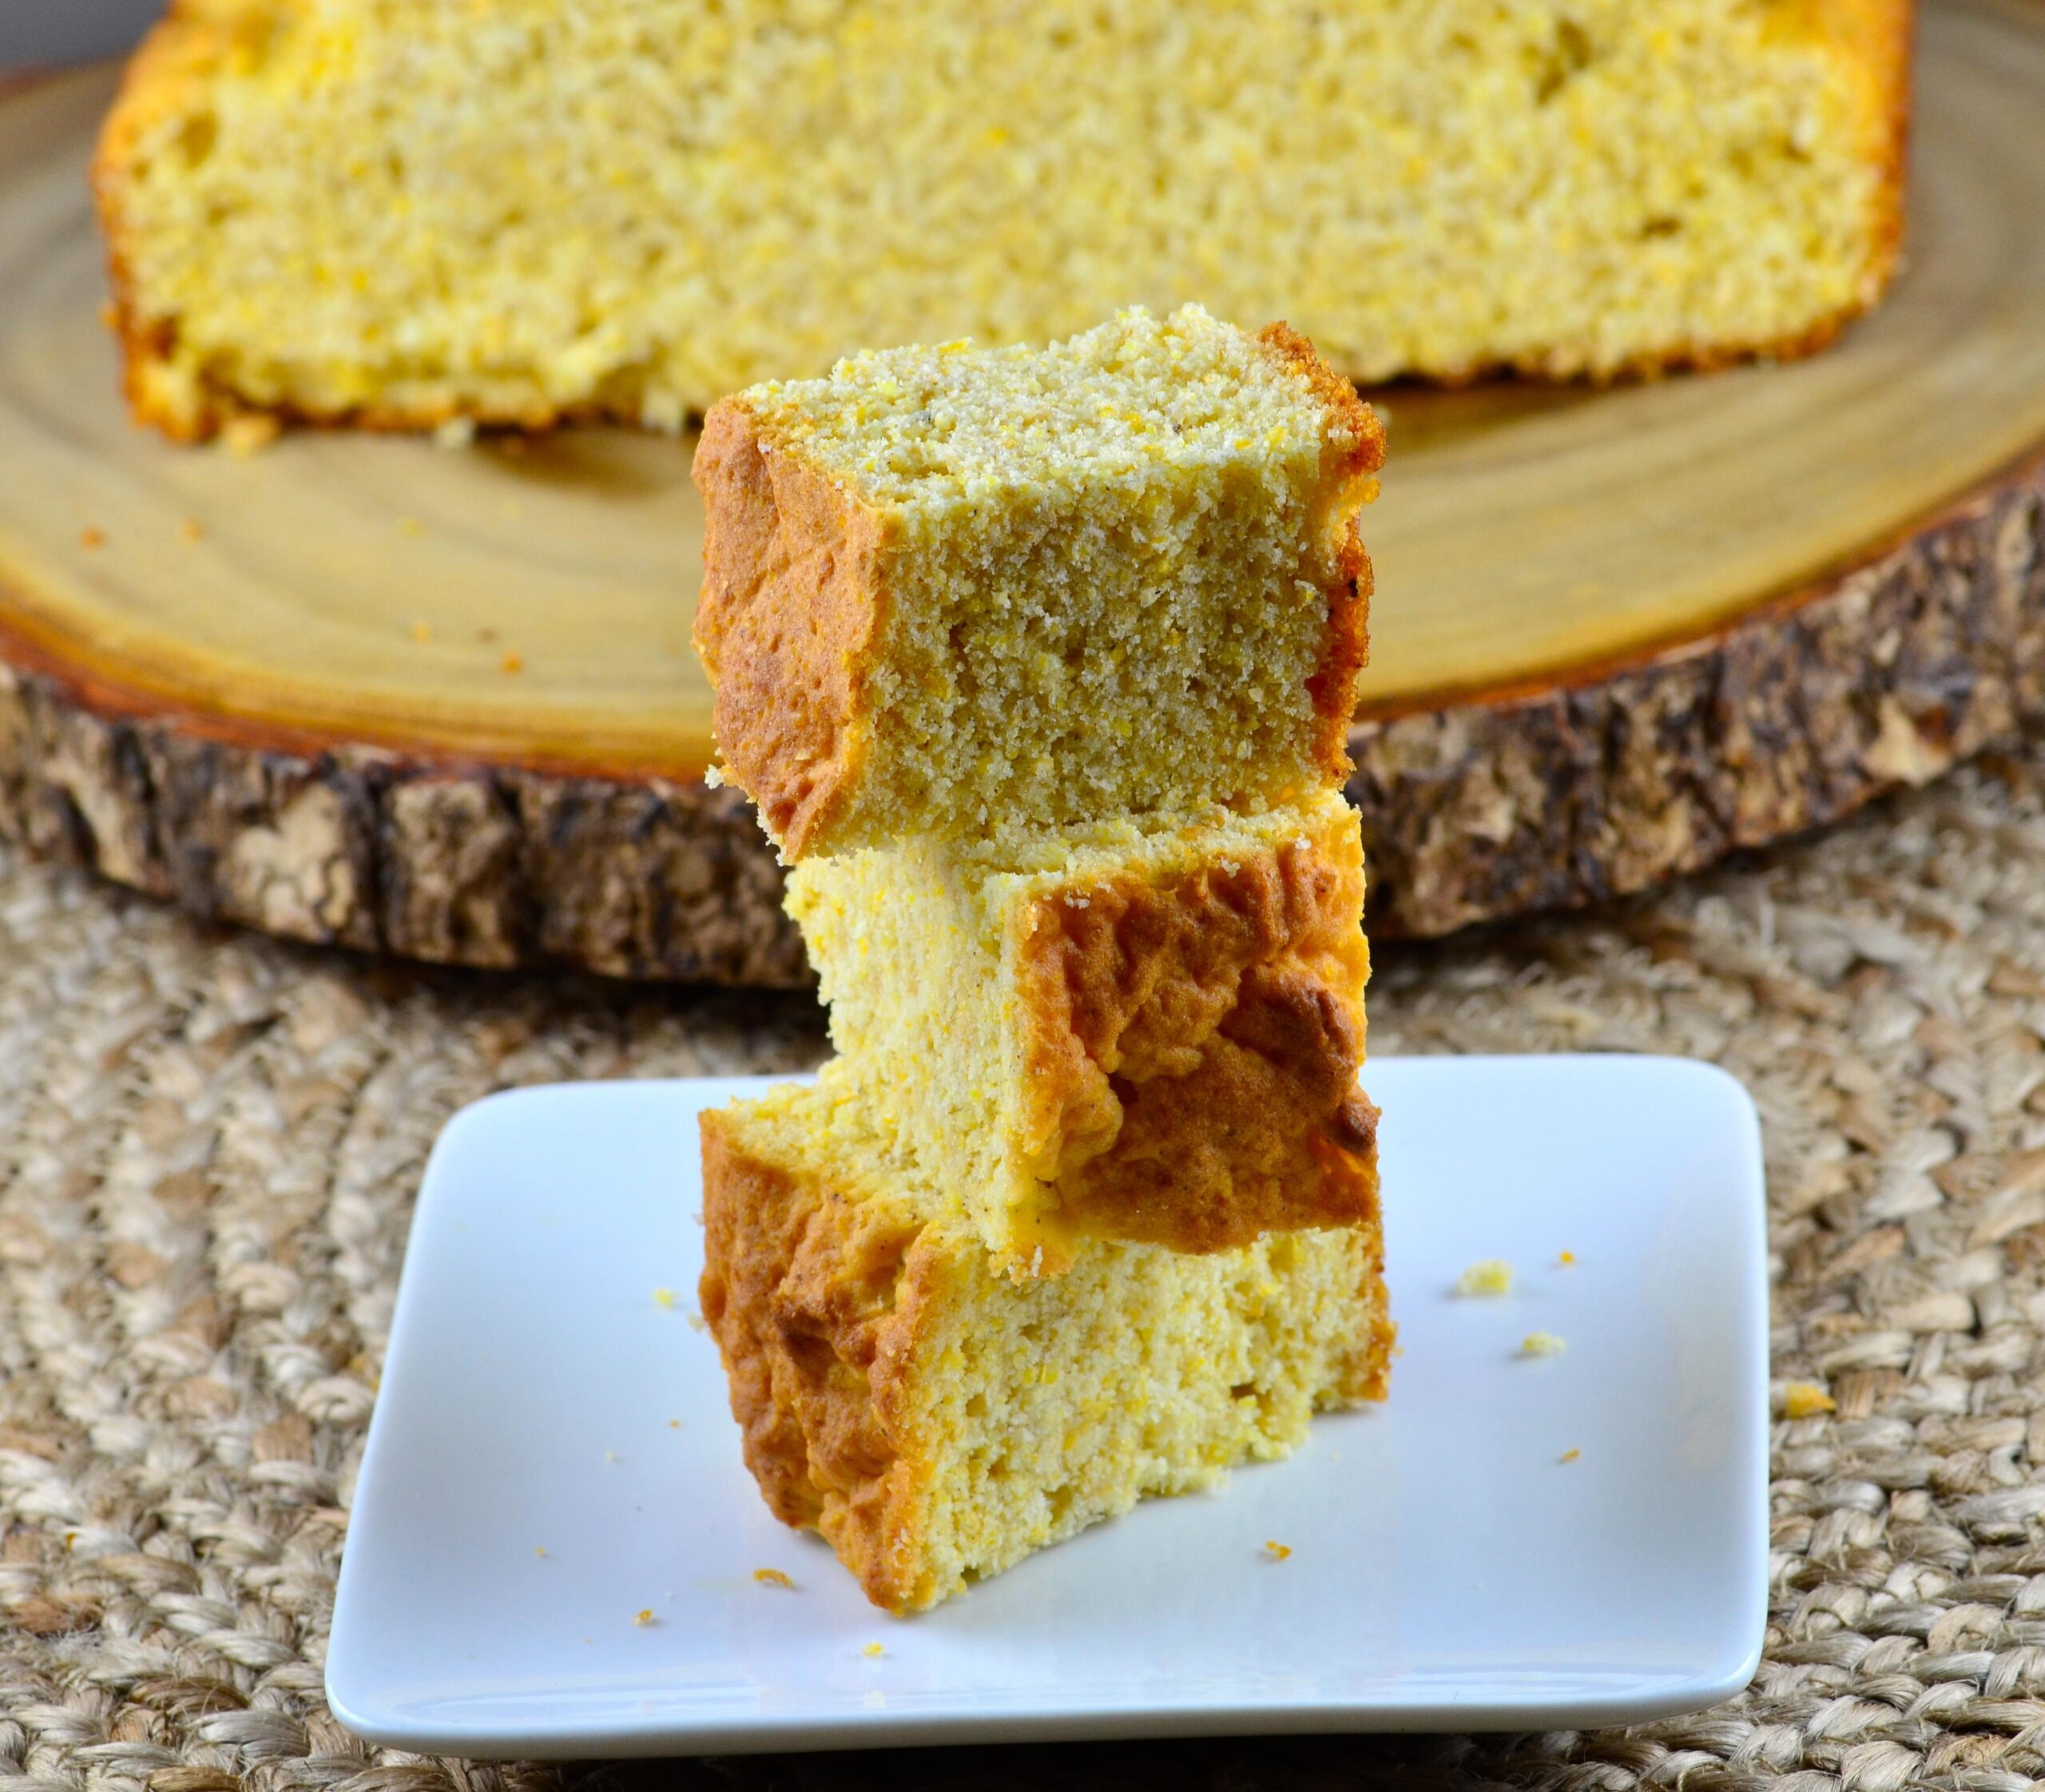  Golden brown and delicious: gluten-free cornbread fresh from the oven!